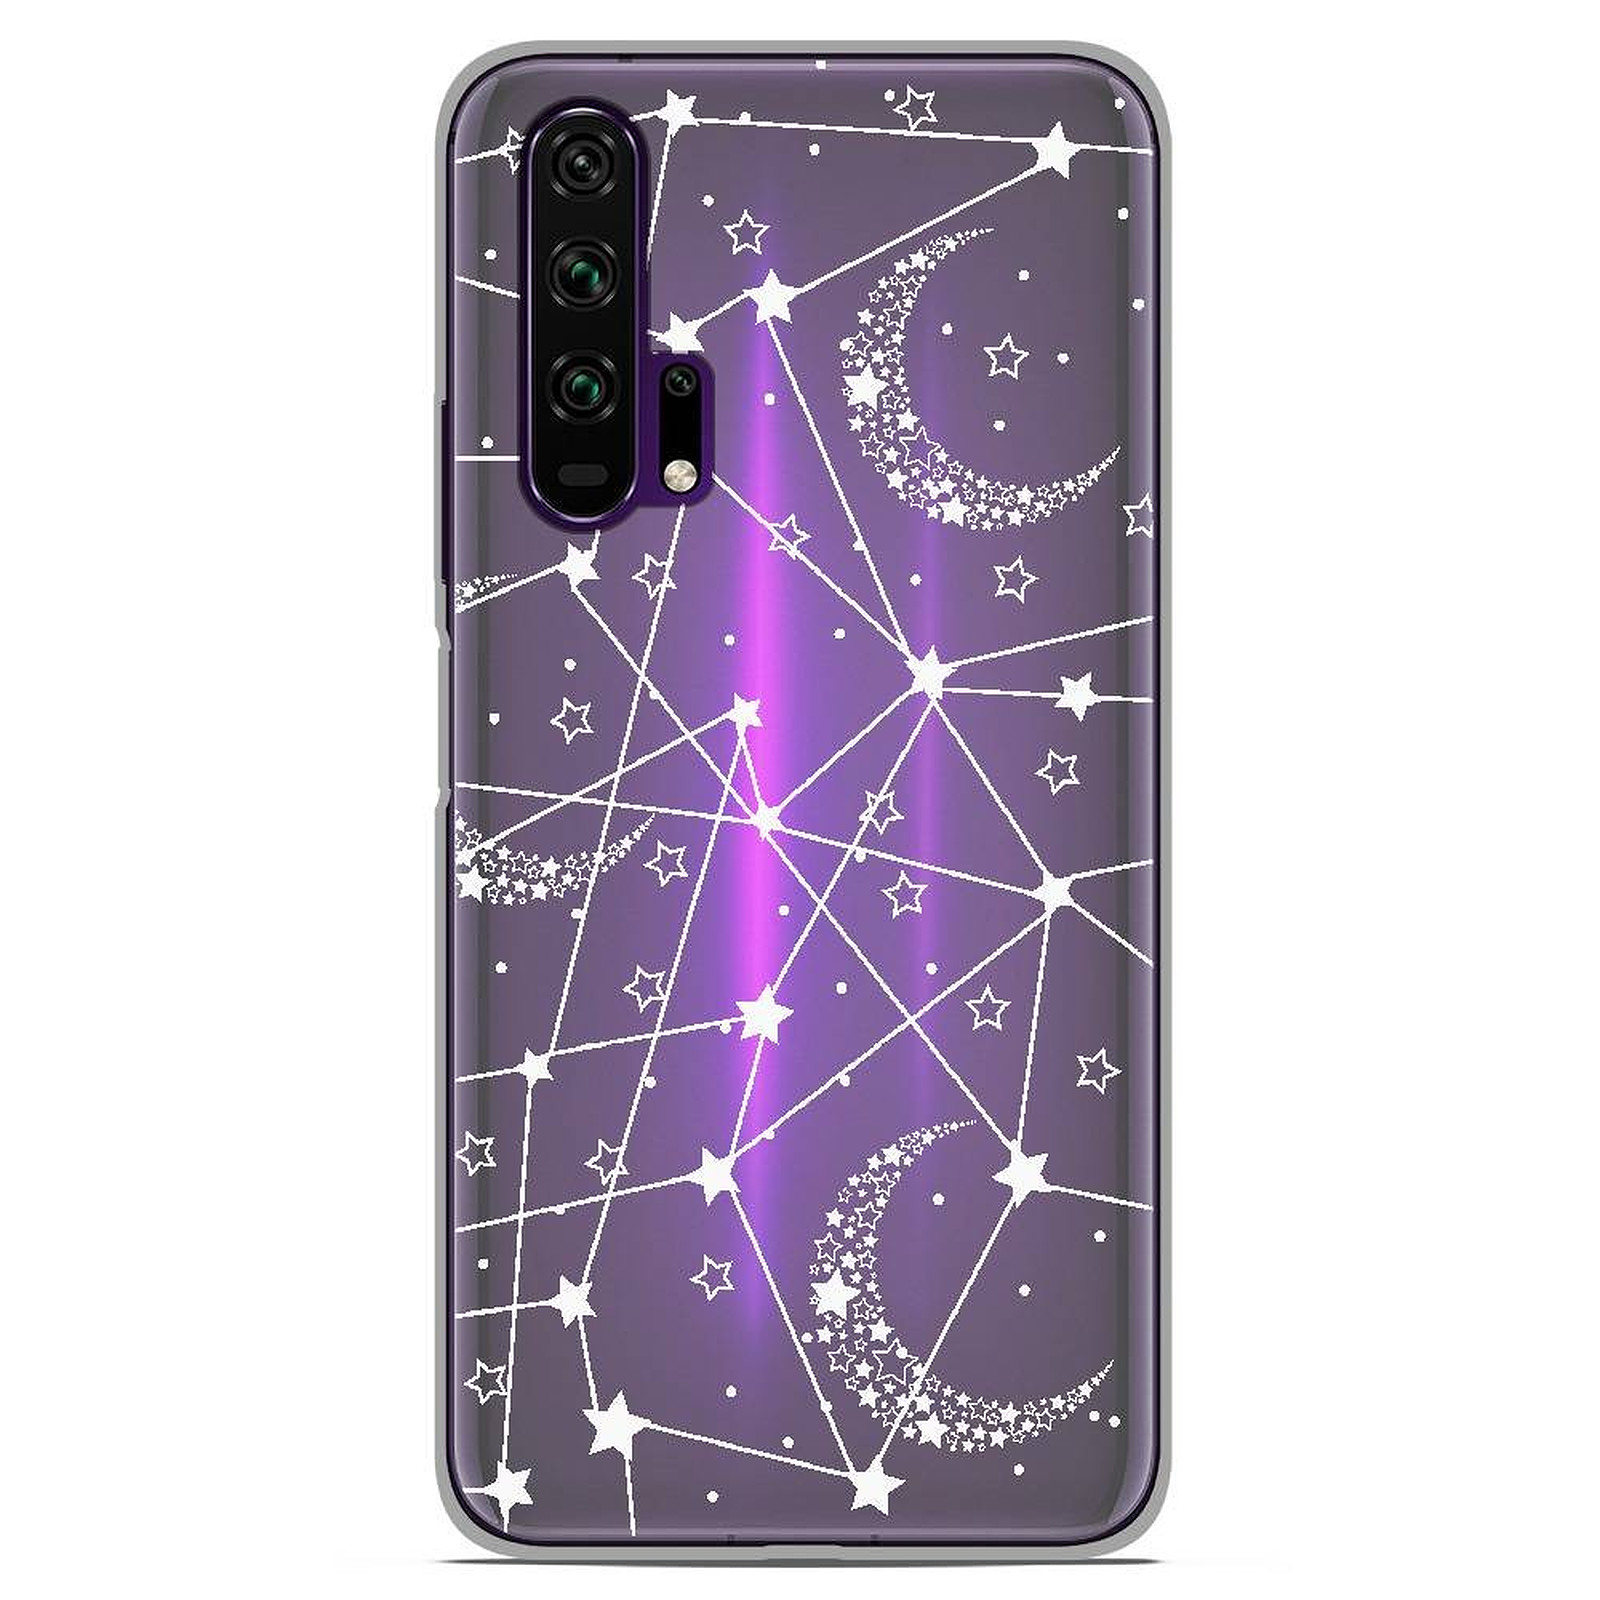 1001 Coques Coque silicone gel Huawei Honor 20 Pro motif Lignes etoilees - Coque telephone 1001Coques